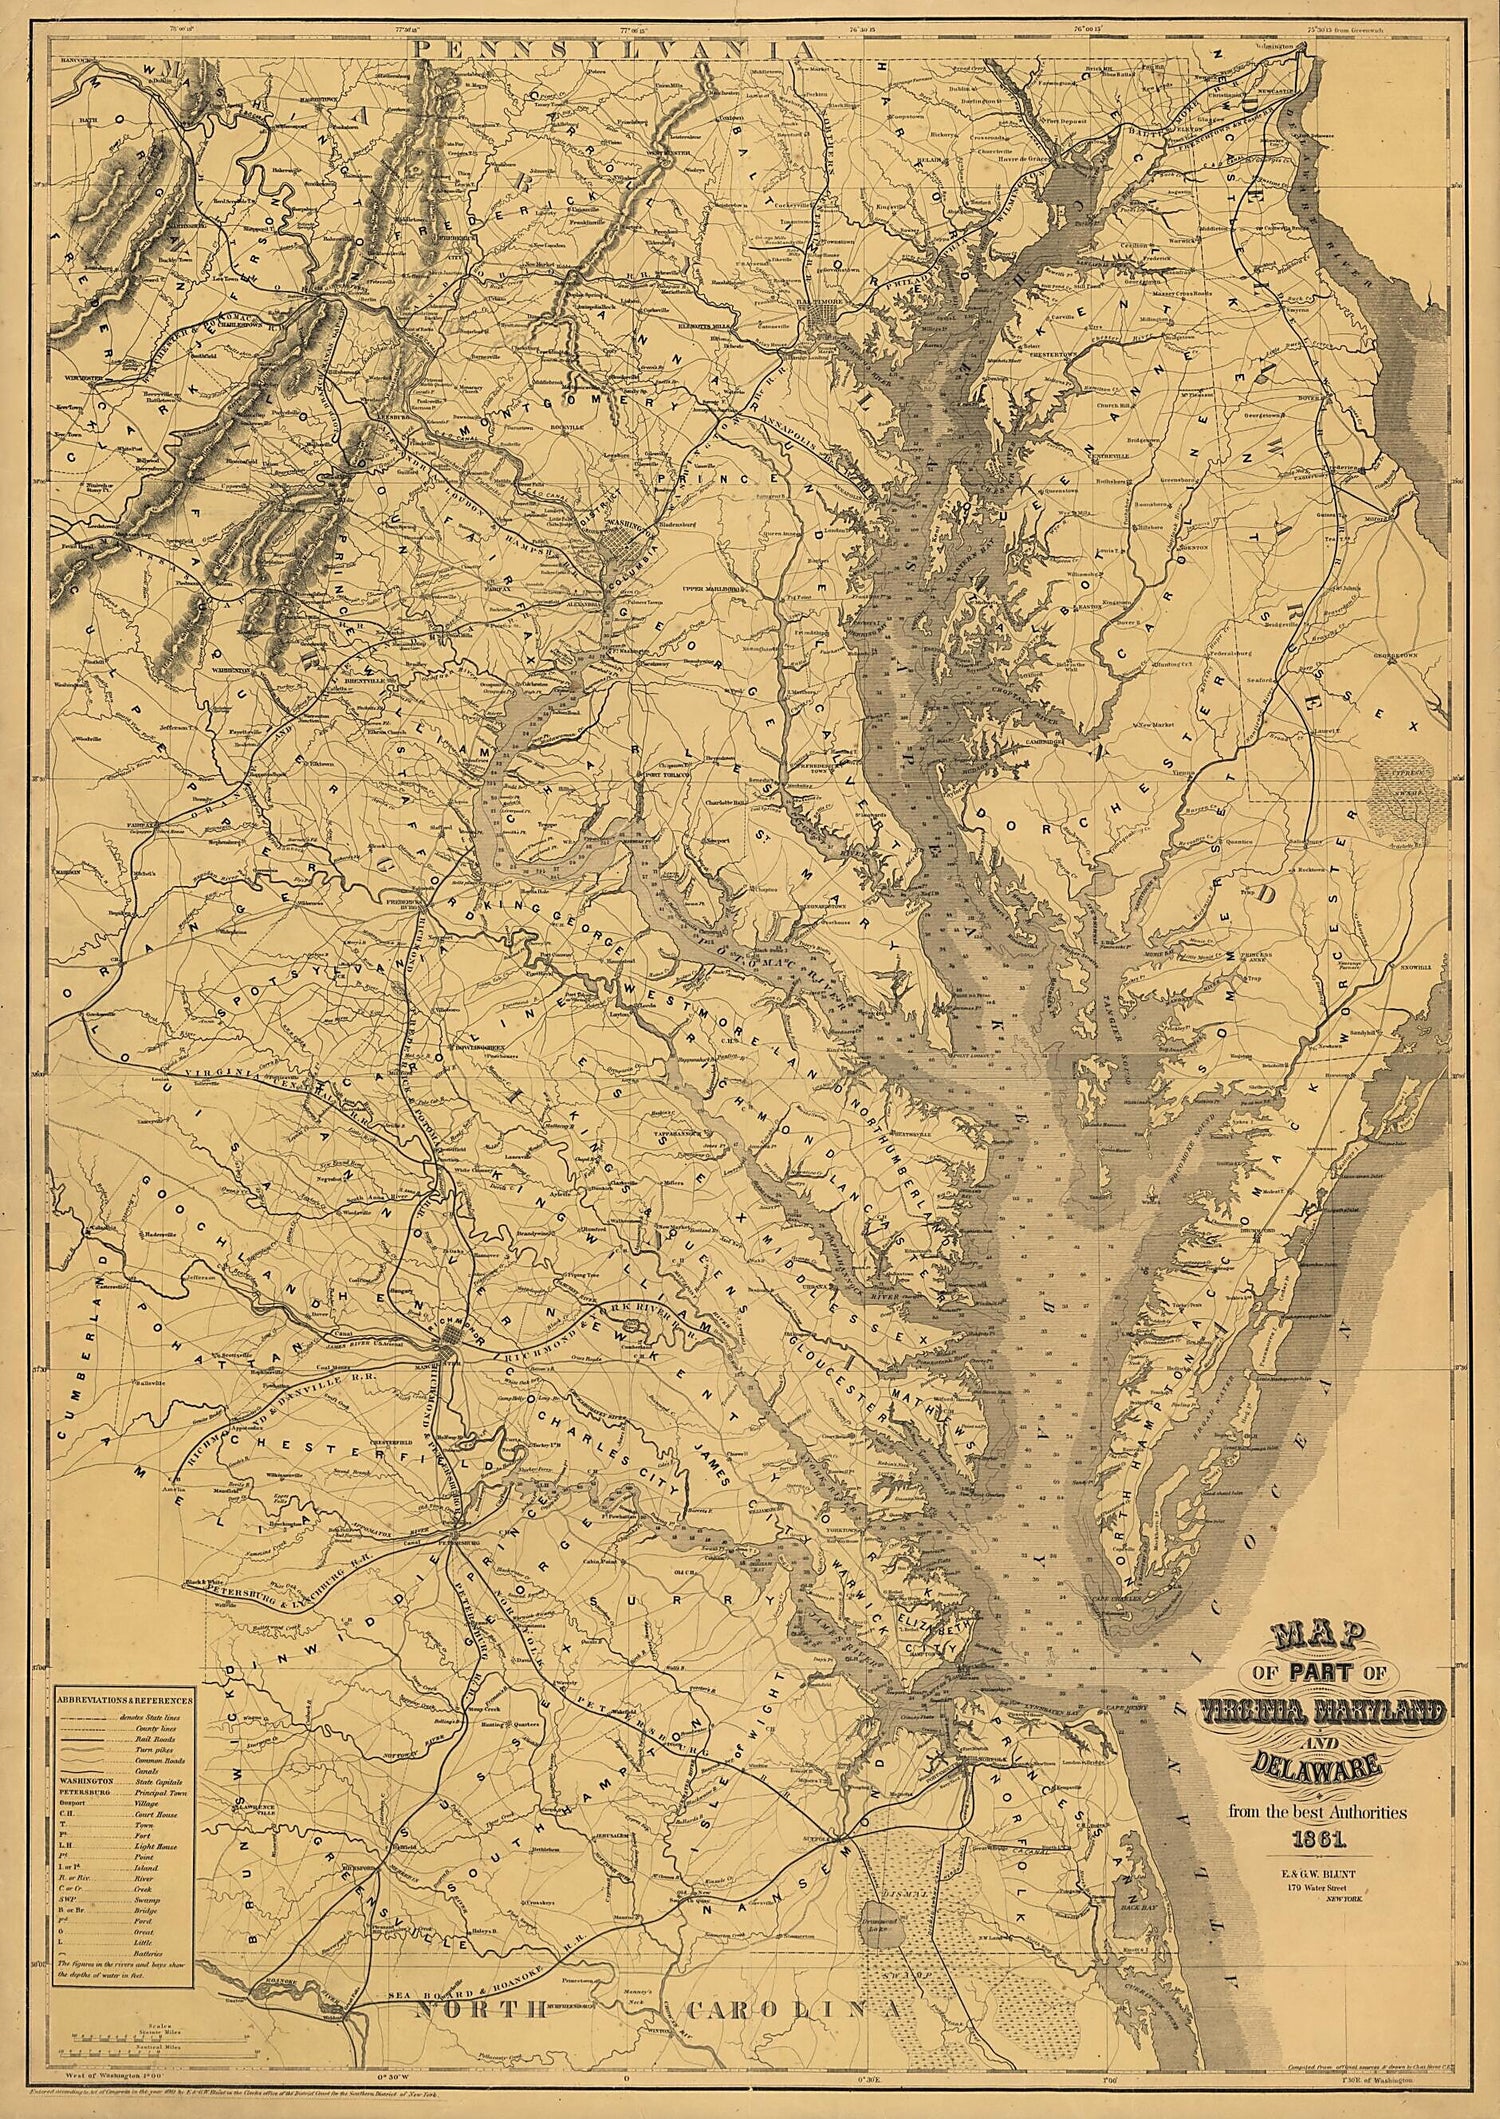 This old map of Map of Part of Virginia, Maryland and Delaware from the Best Authorities from 1861 was created by Charles Heyne in 1861